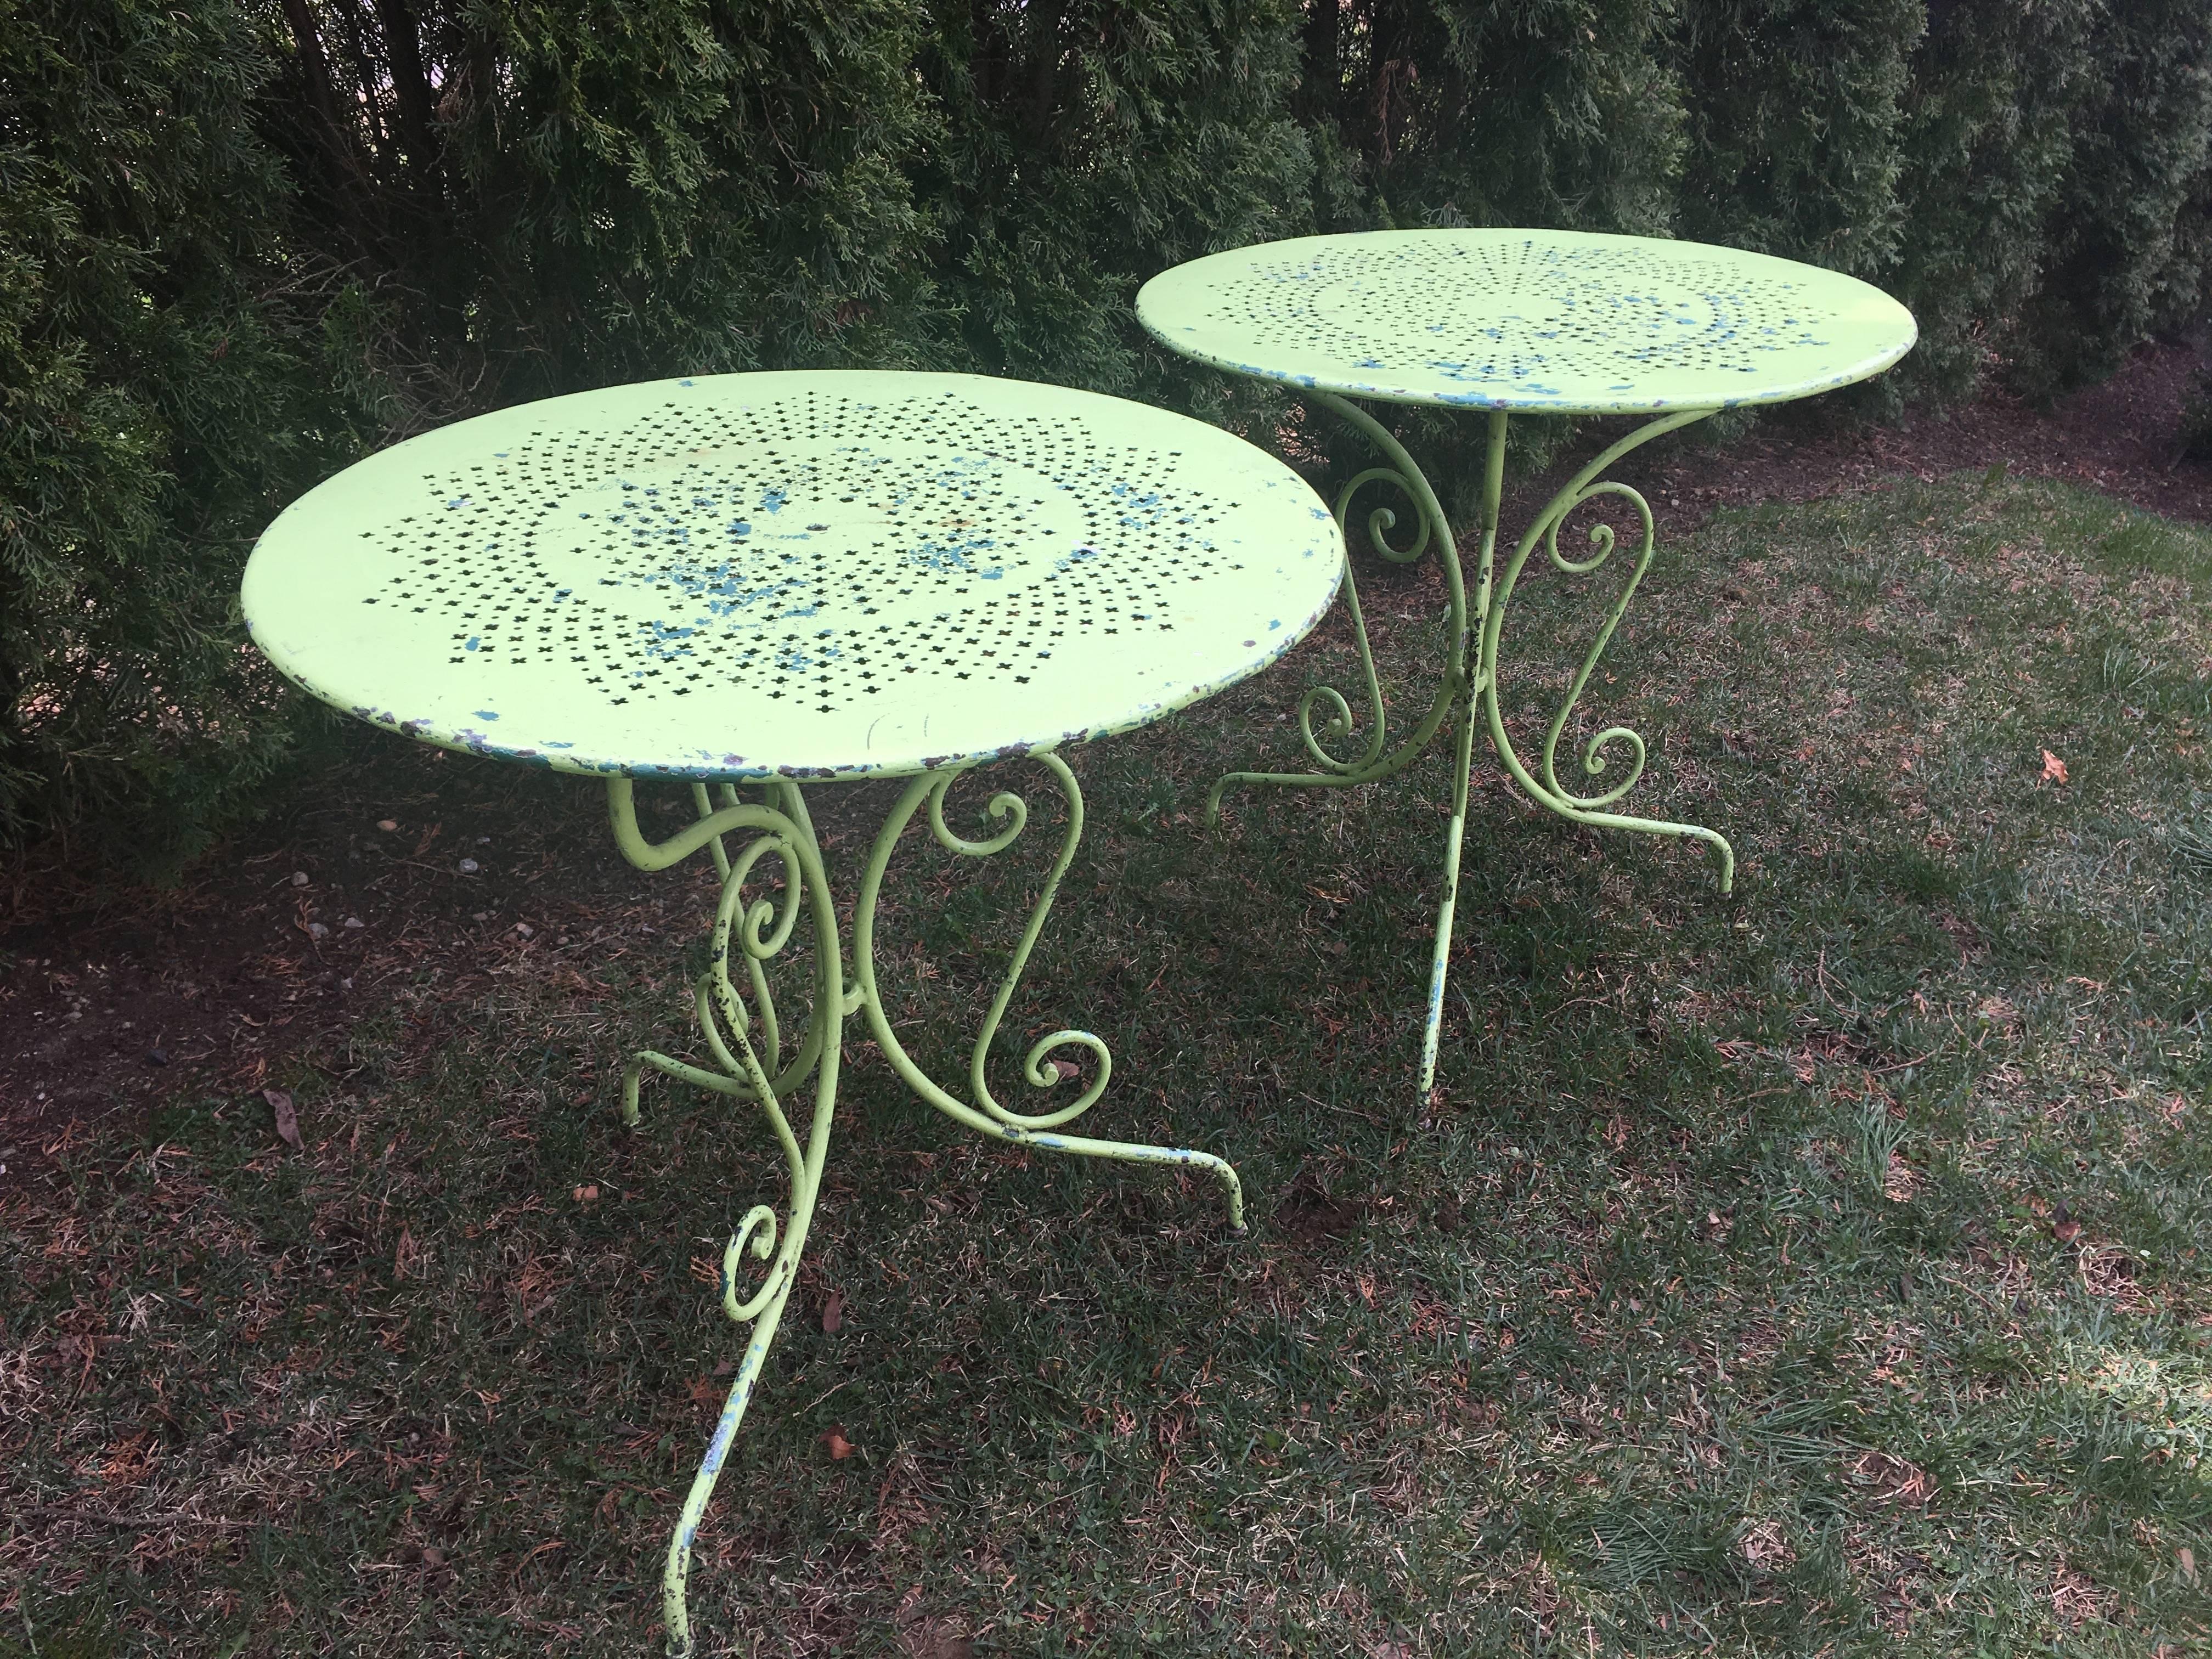 We love the acid green over dark blue paint on these pierced top tables and their scrolled legs are elegant without being fussy. Perfect in the garden as side tables or on your terrace for a cup of morning coffee. In wonderful condition, we can